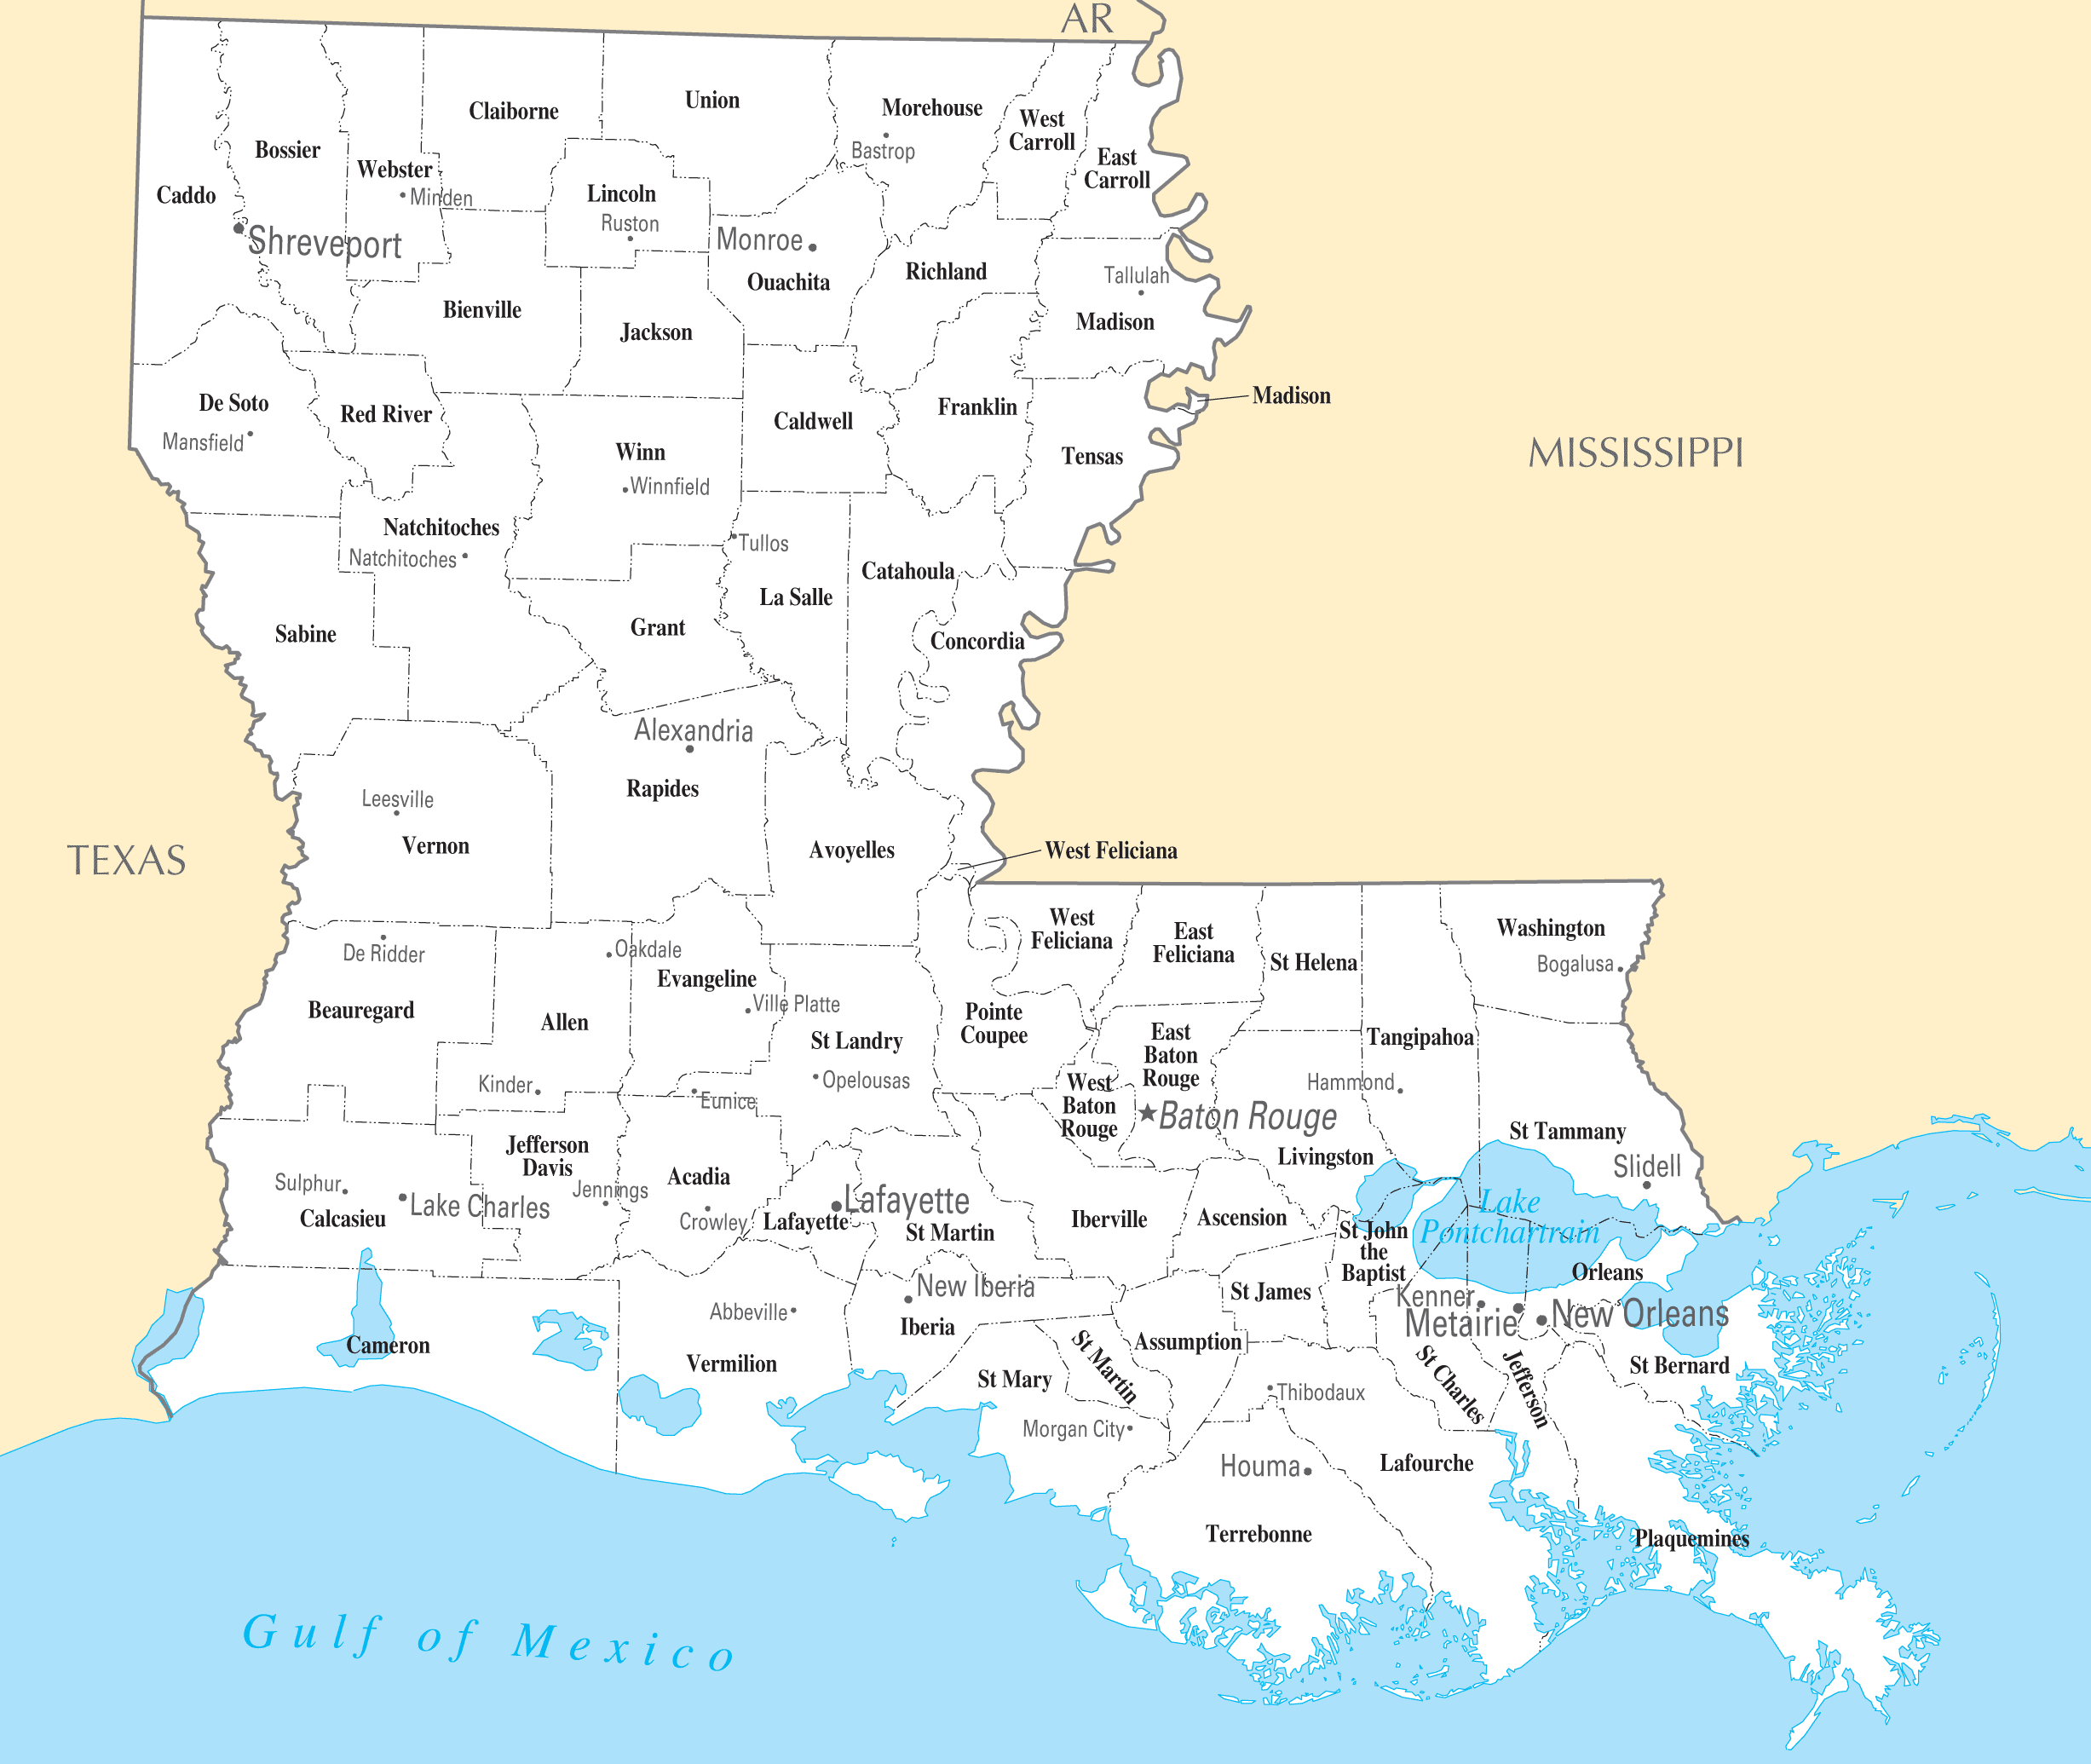 5 Best Images of Printable Map Of Louisiana Cities - Louisiana Map with Cities and Towns ...